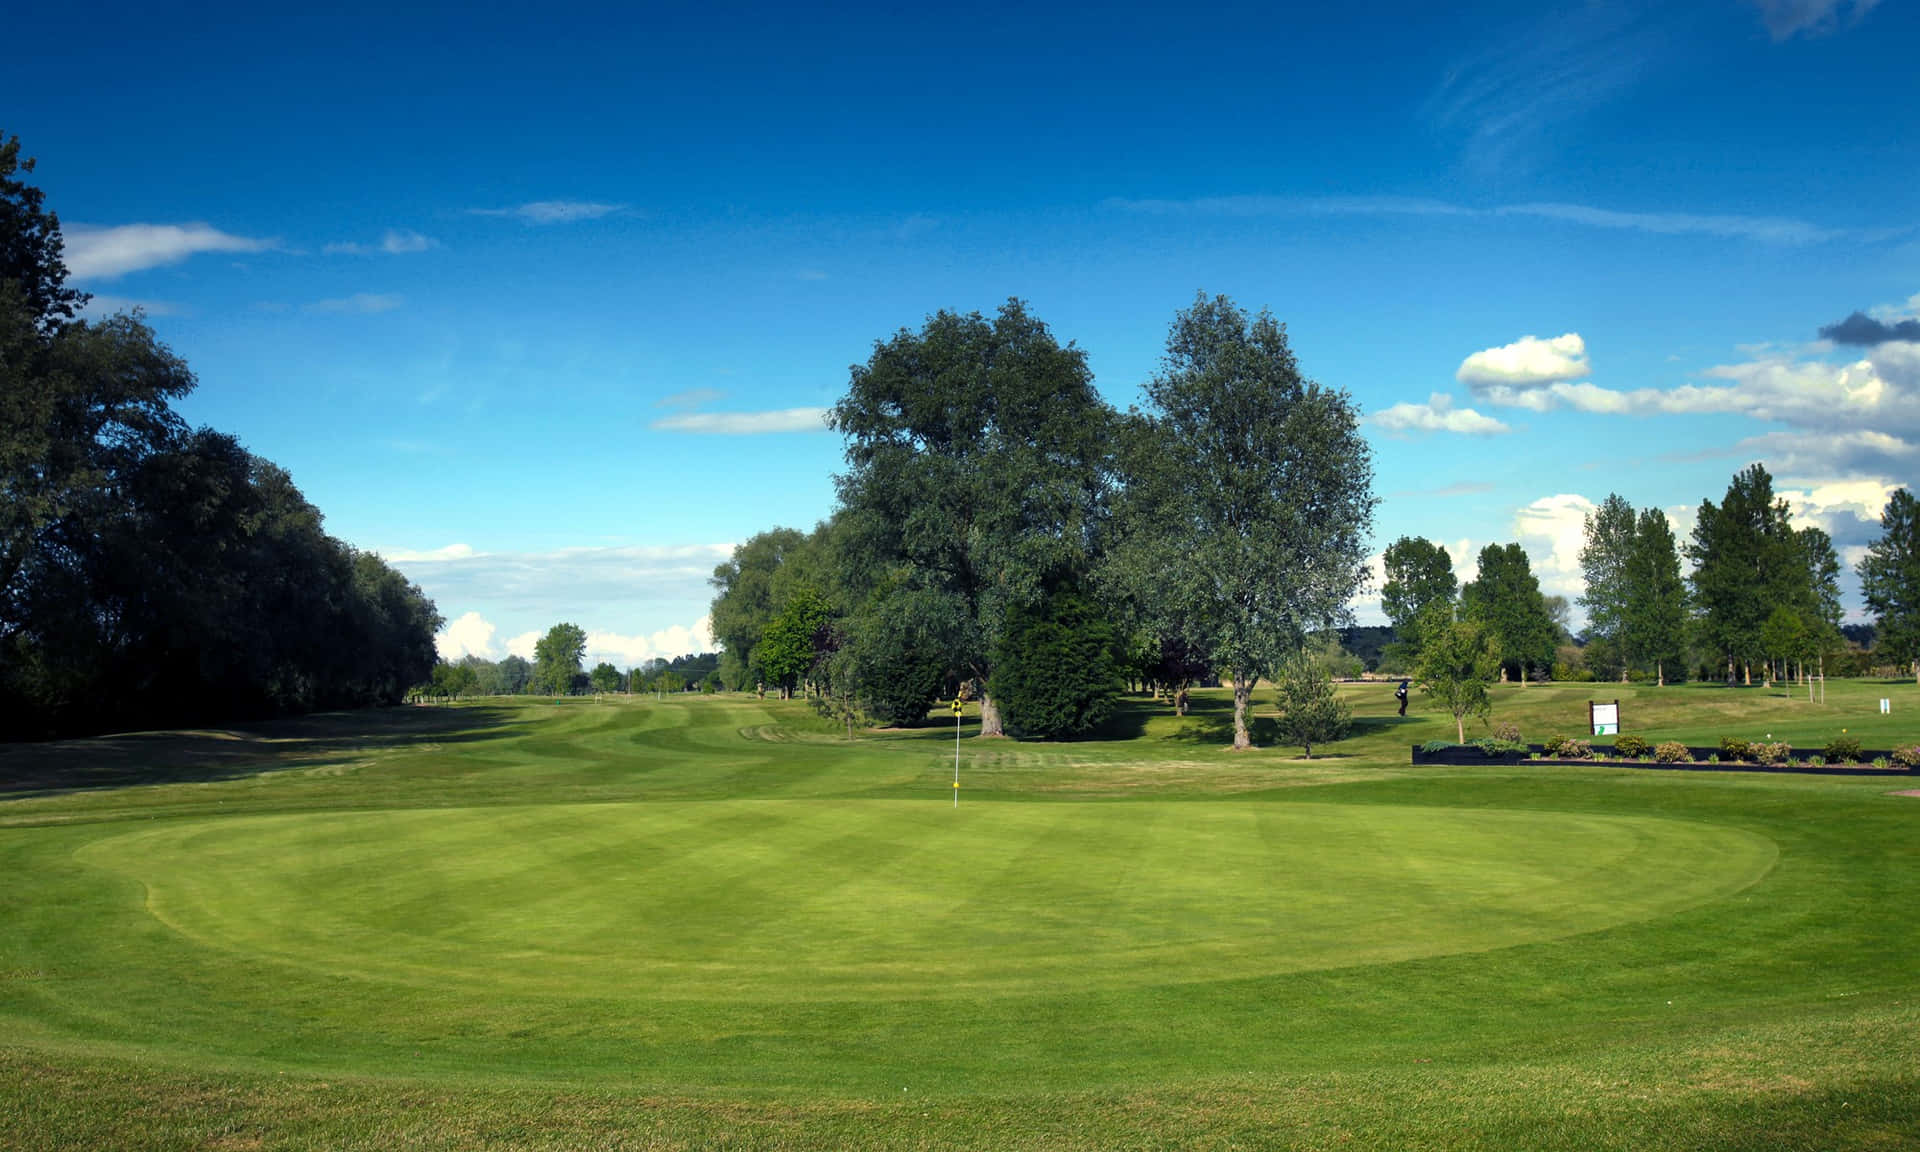 Relax and Challenge Yourself at this Picturesque Golf Course